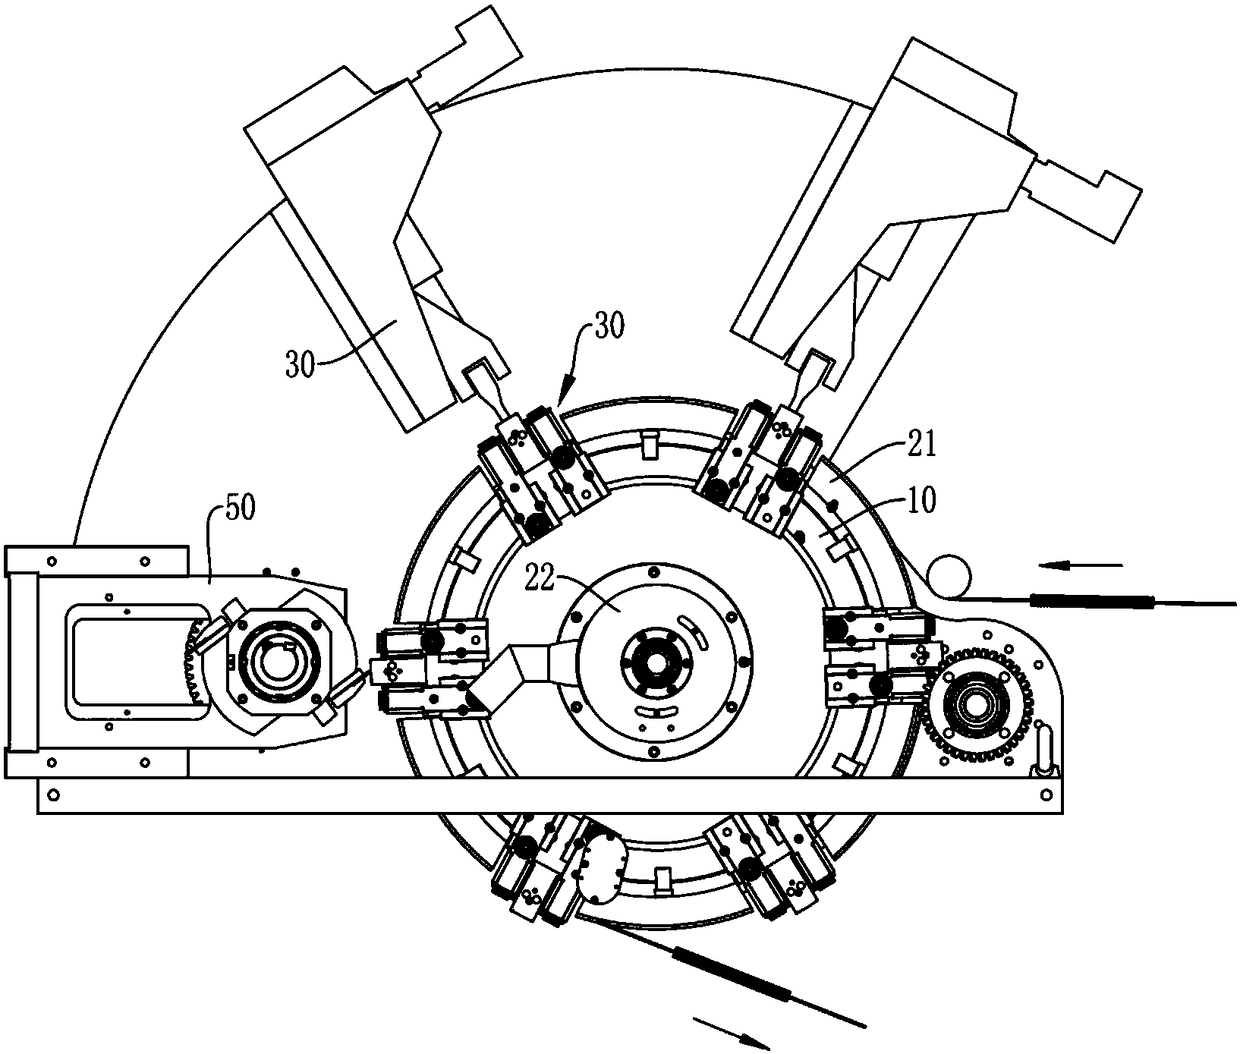 Ultrasonic sealing and pressing equipment and process